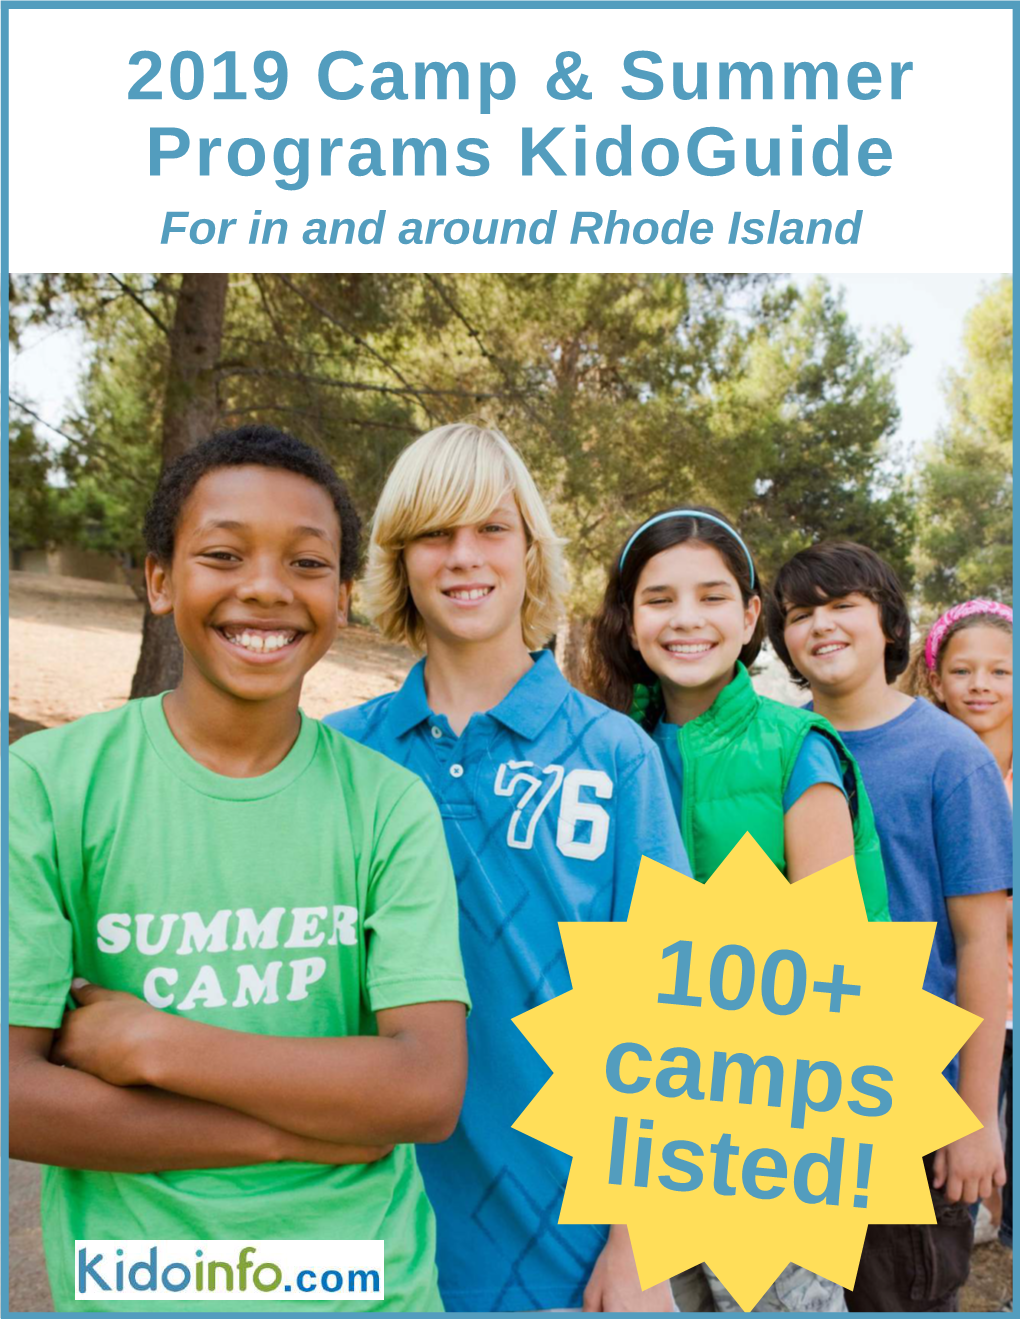 100+ Camps Listed! 2019 Camp & Summer Programs Kidoguide